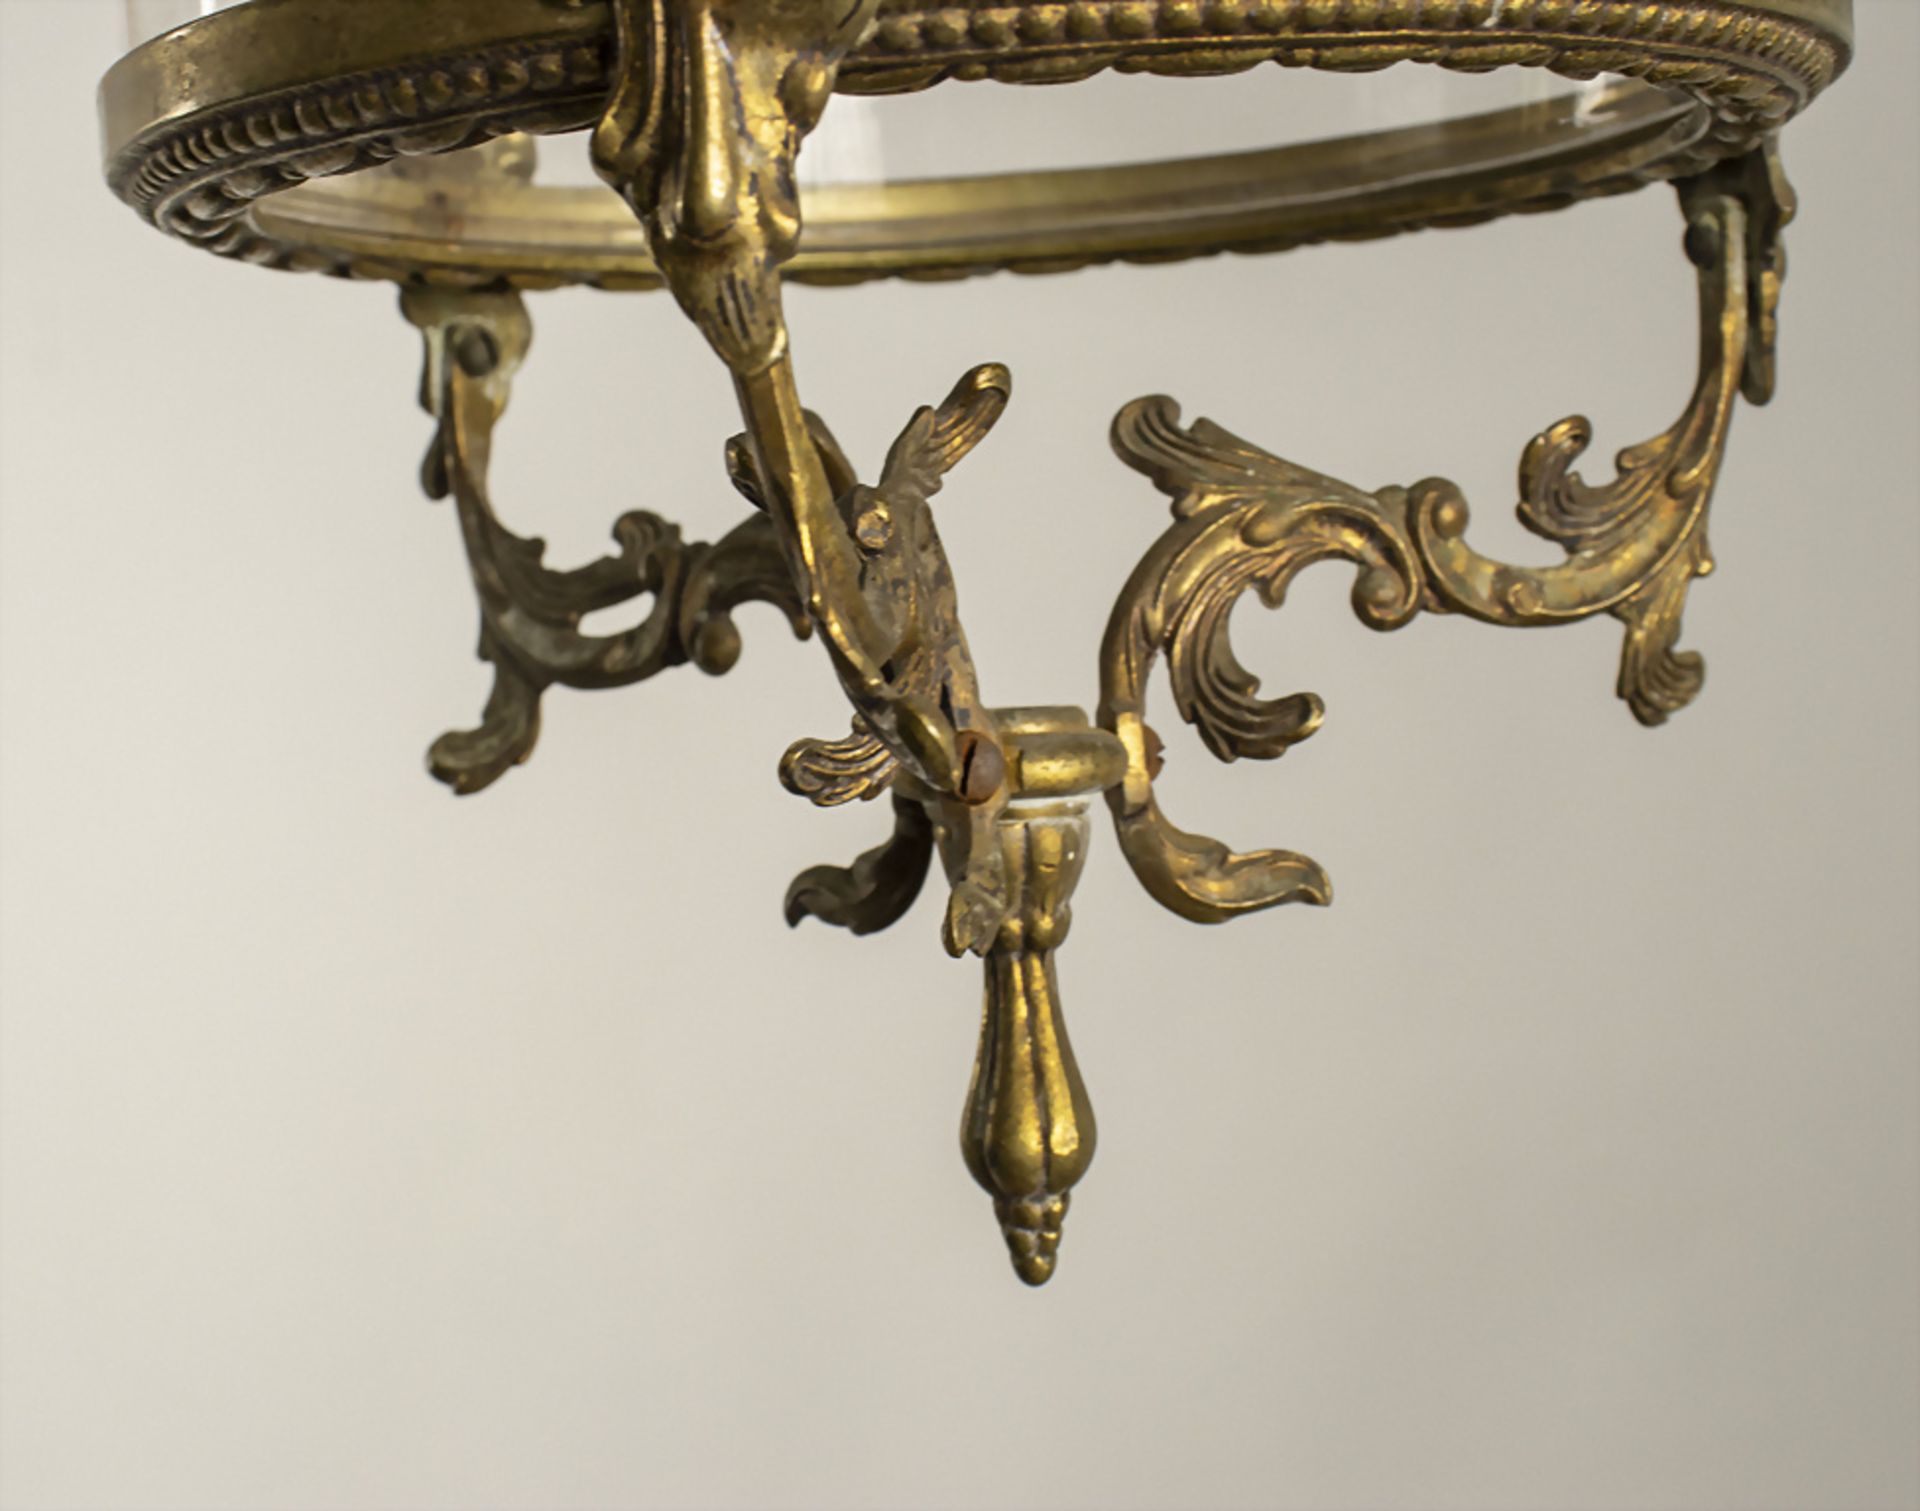 Flurlampe / A hallway ceiling lamp, Frankreich, Anfang 20. Jh. - Image 3 of 5